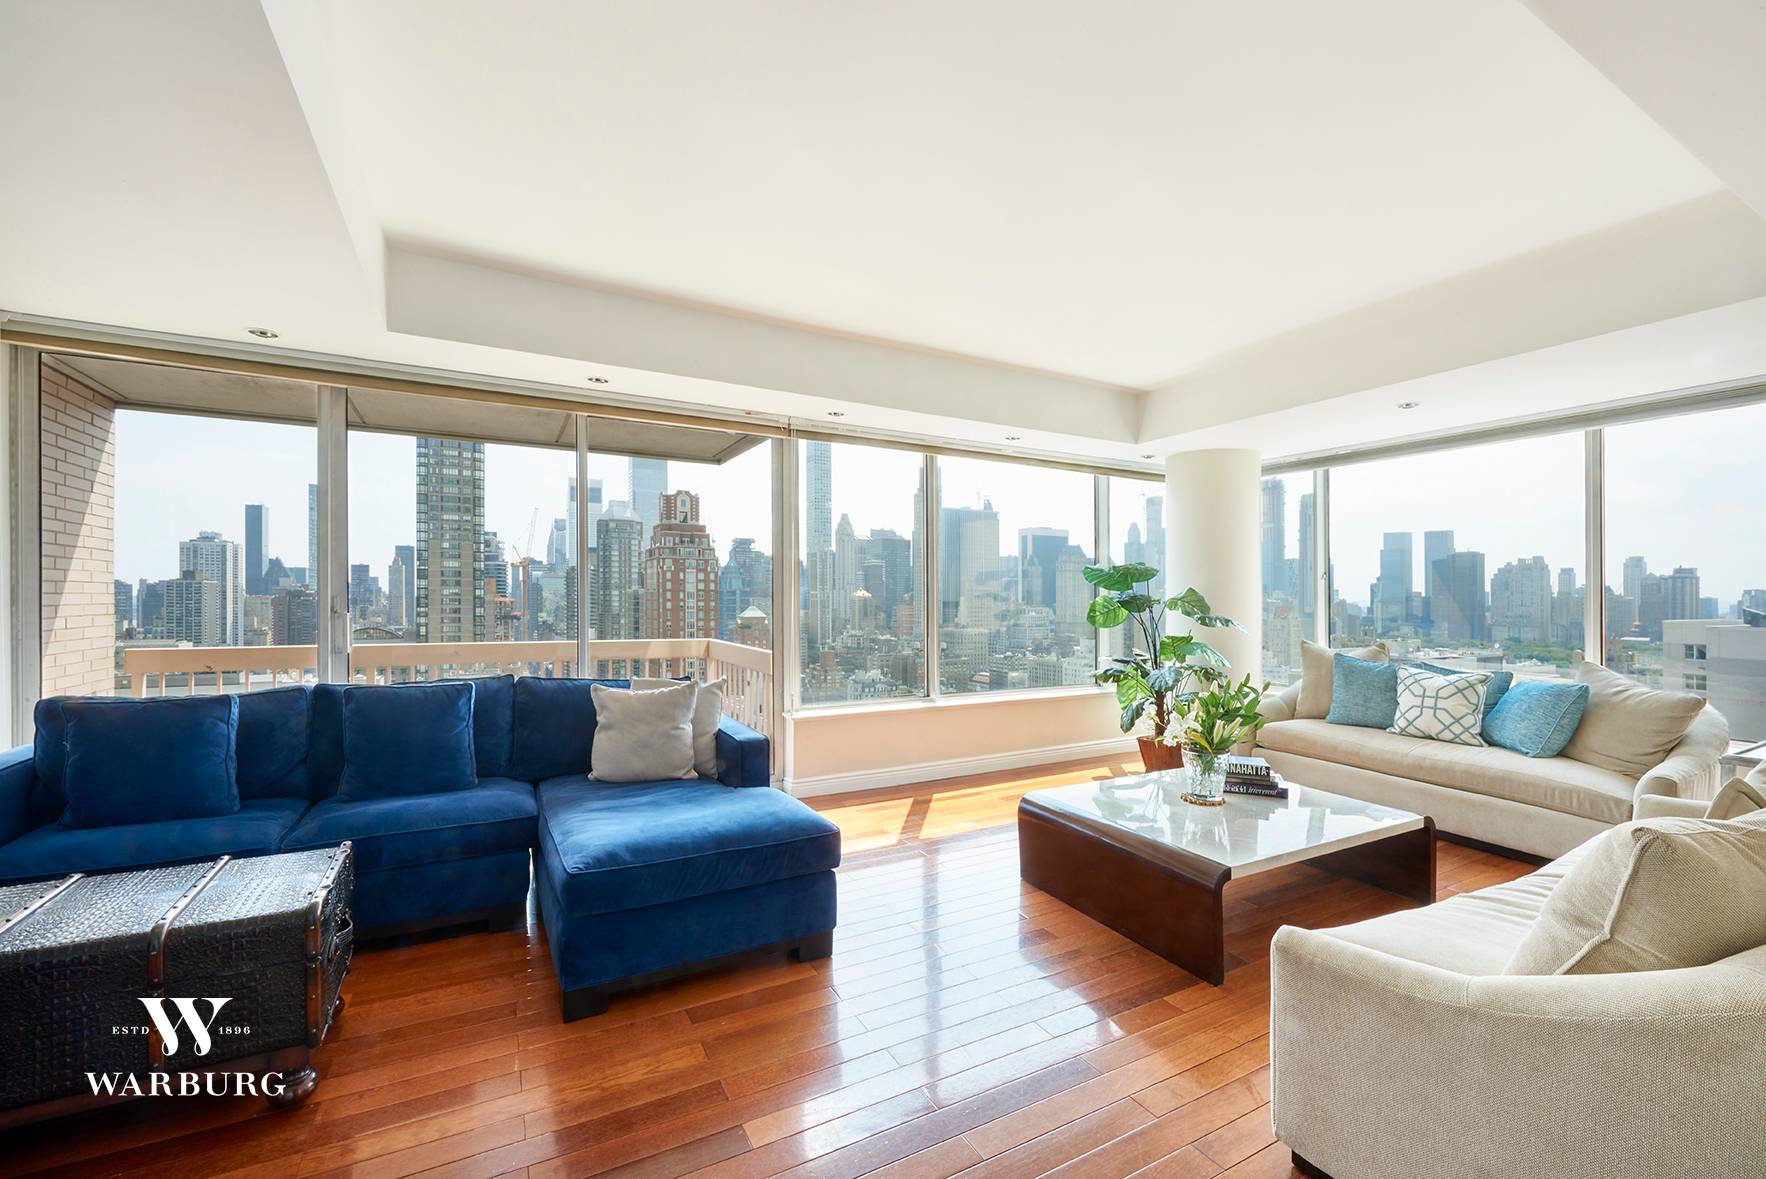 The epitome of class and luxury this top of the line condo now offers a magnificent 3 bed 3.